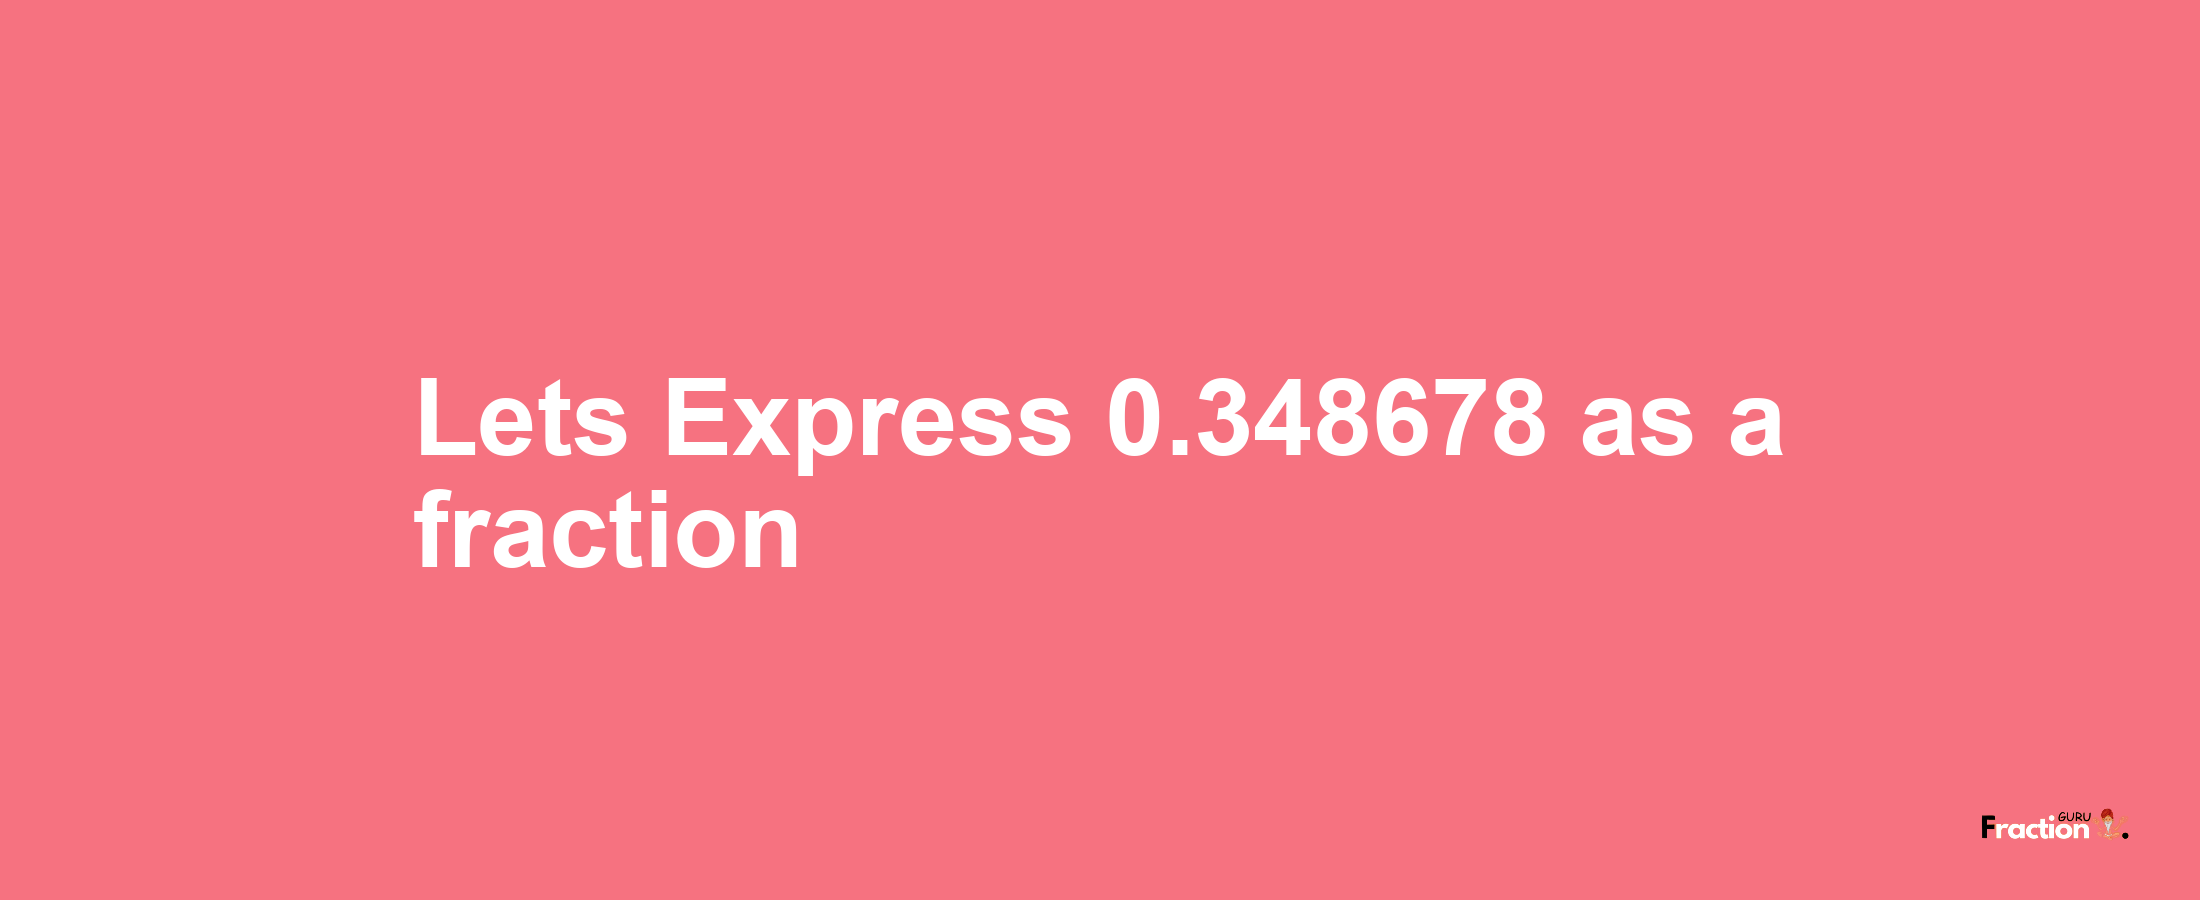 Lets Express 0.348678 as afraction